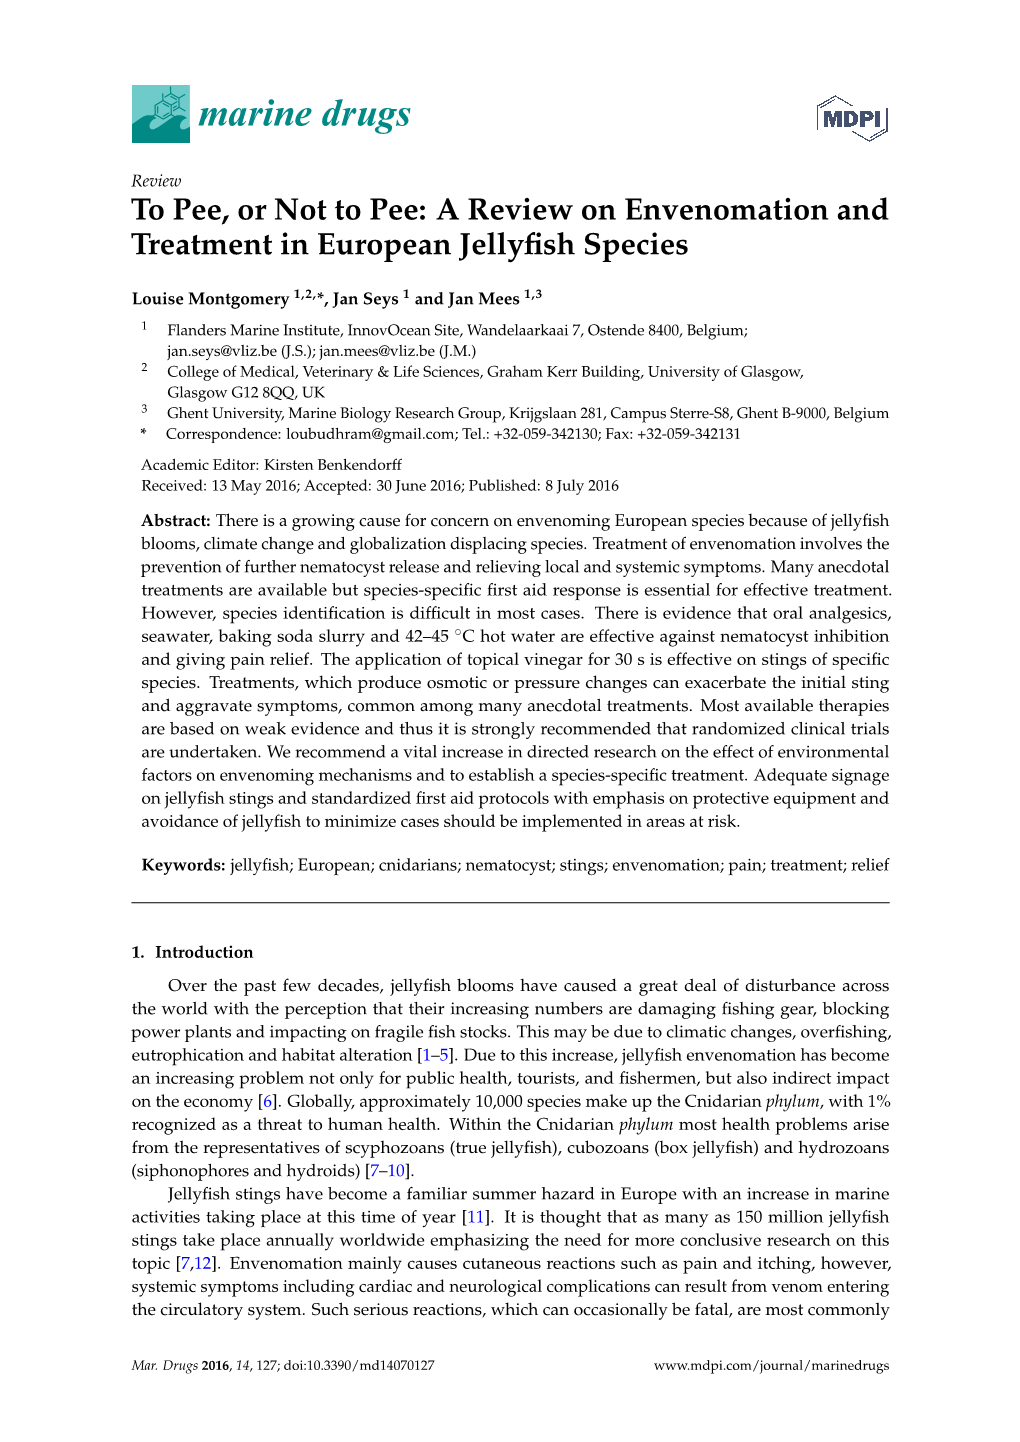 A Review on Envenomation and Treatment in European Jellyfish